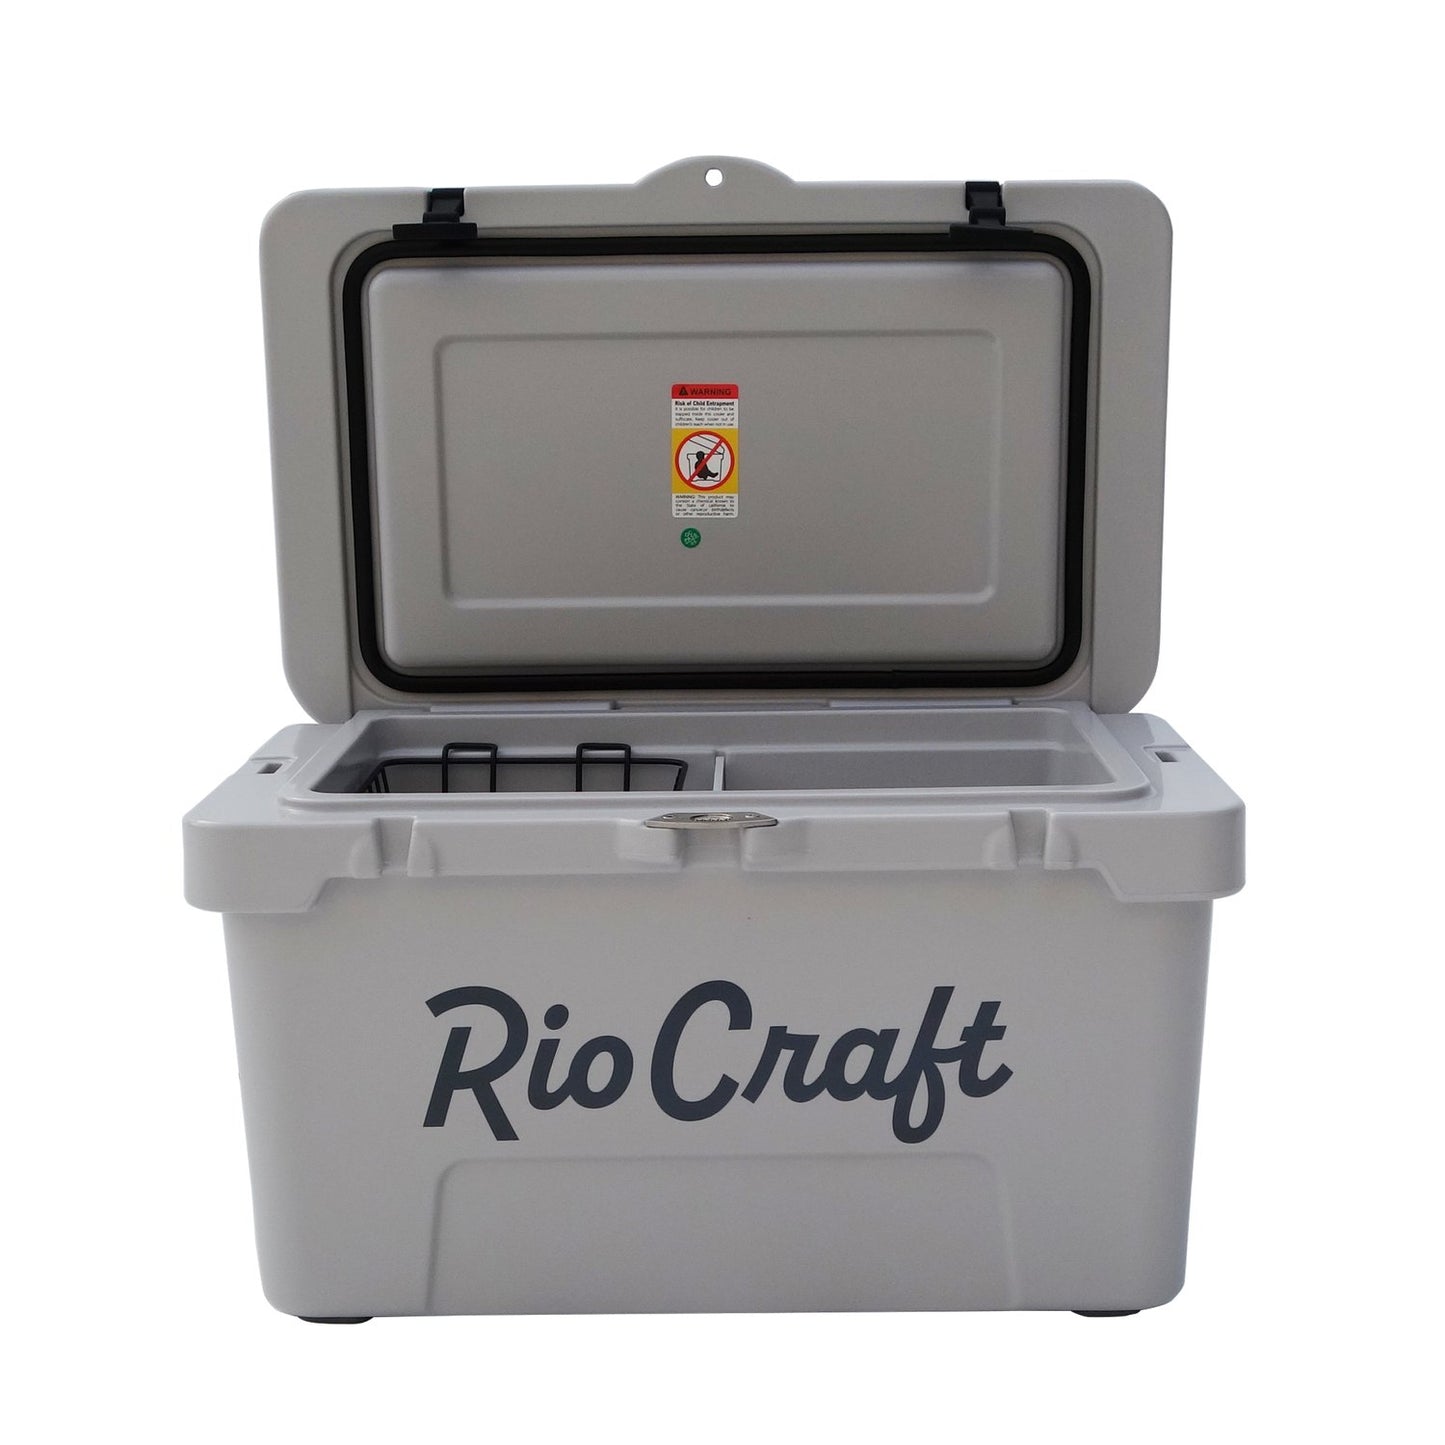 A durable Rio Coolers with the brand name Rio Craft on it.